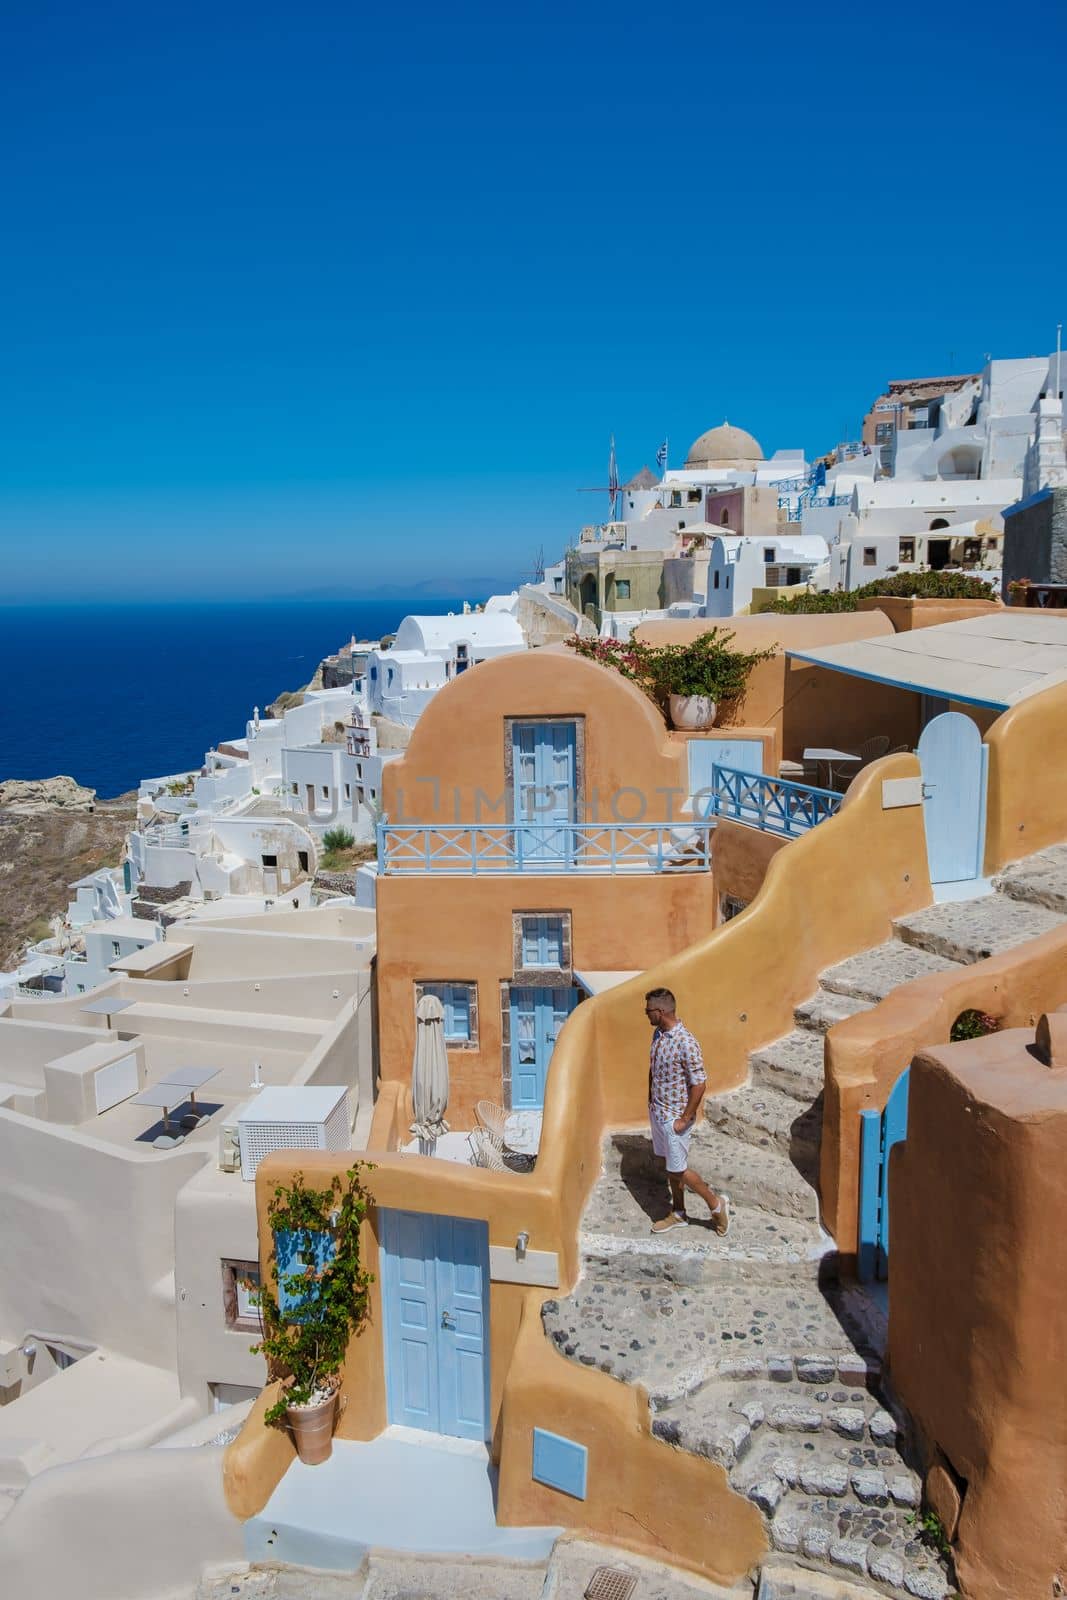 Couple visit Santorini Greece, men and women visit the whitewashed Greek village of Oia during summer vacation at sunrise over the blue domes and white churches